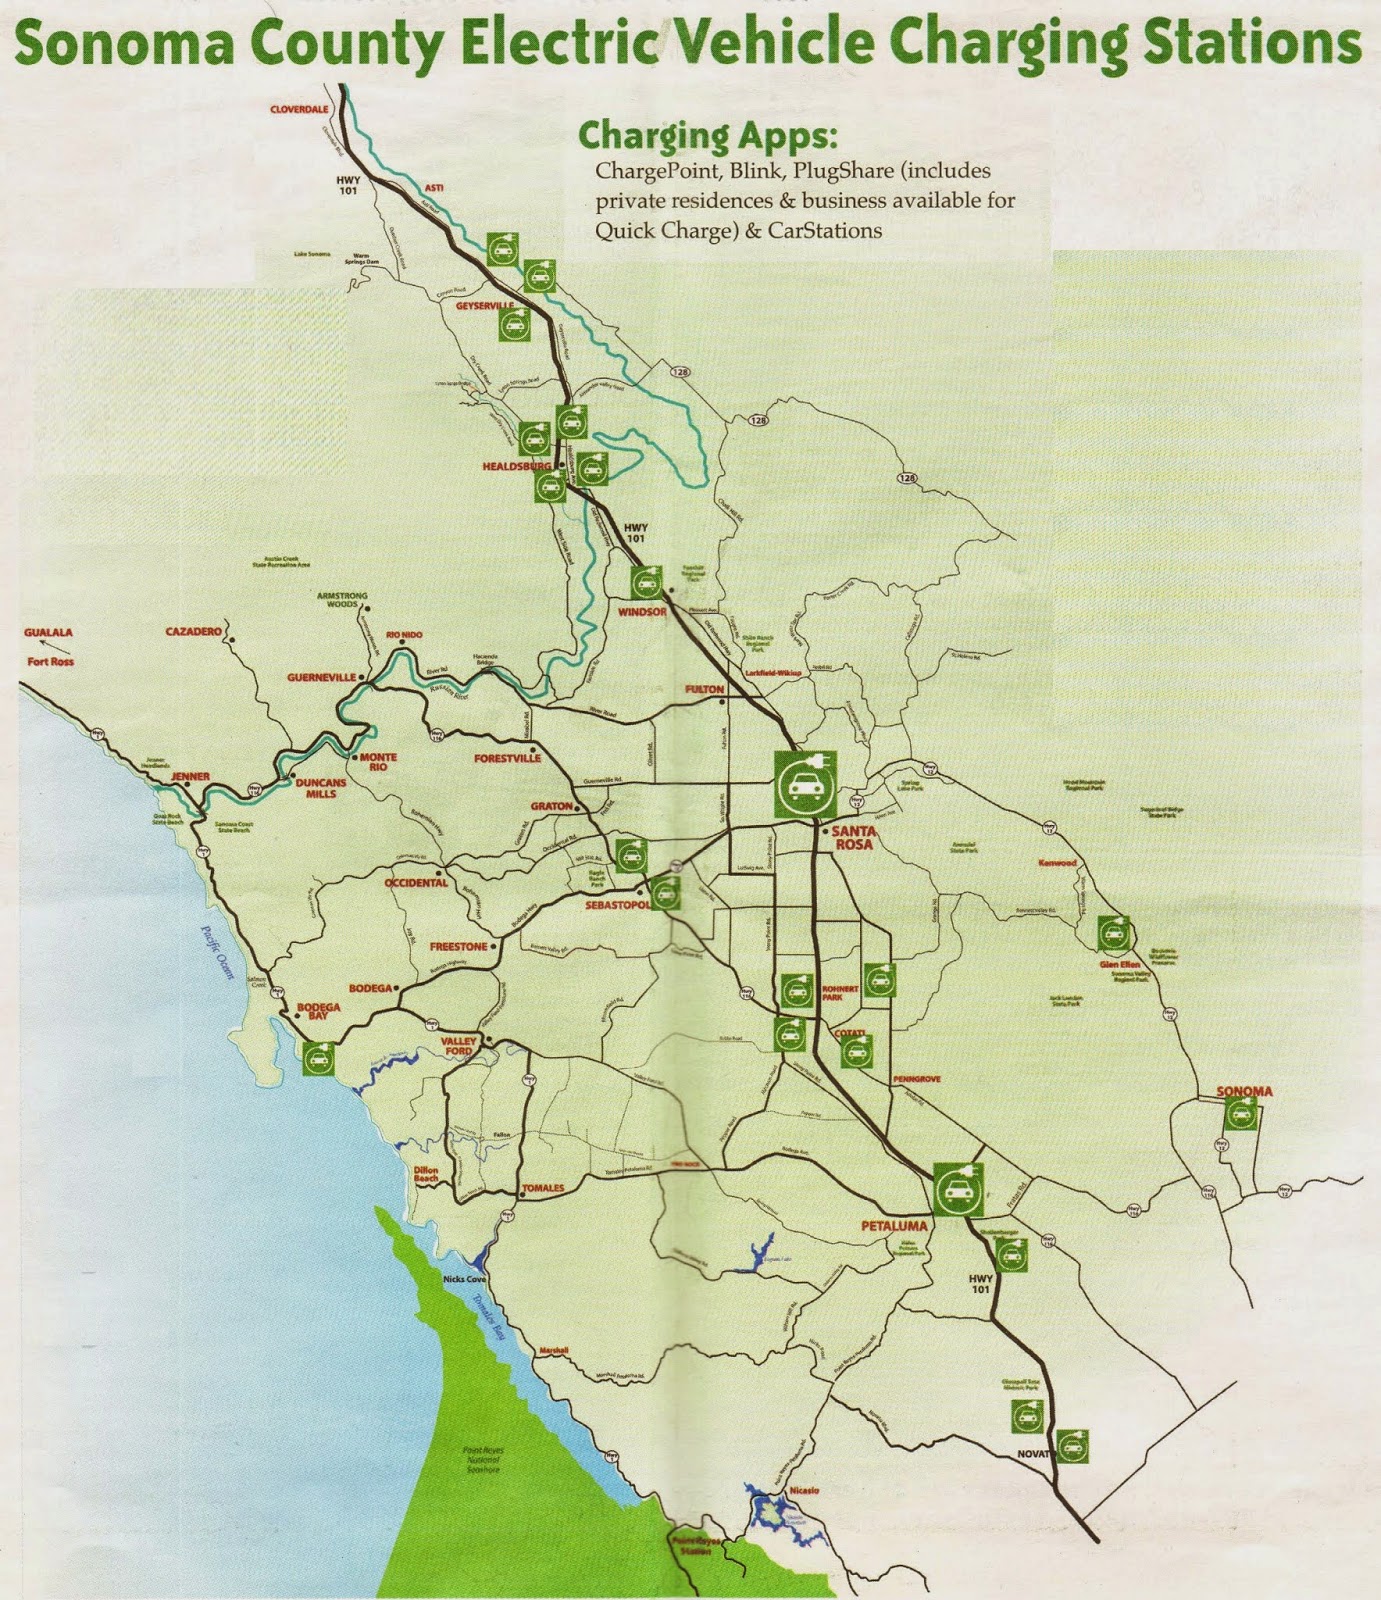 San Pablo Bay Sovereignty Sonoma County Electric Vehicle Charging Stations